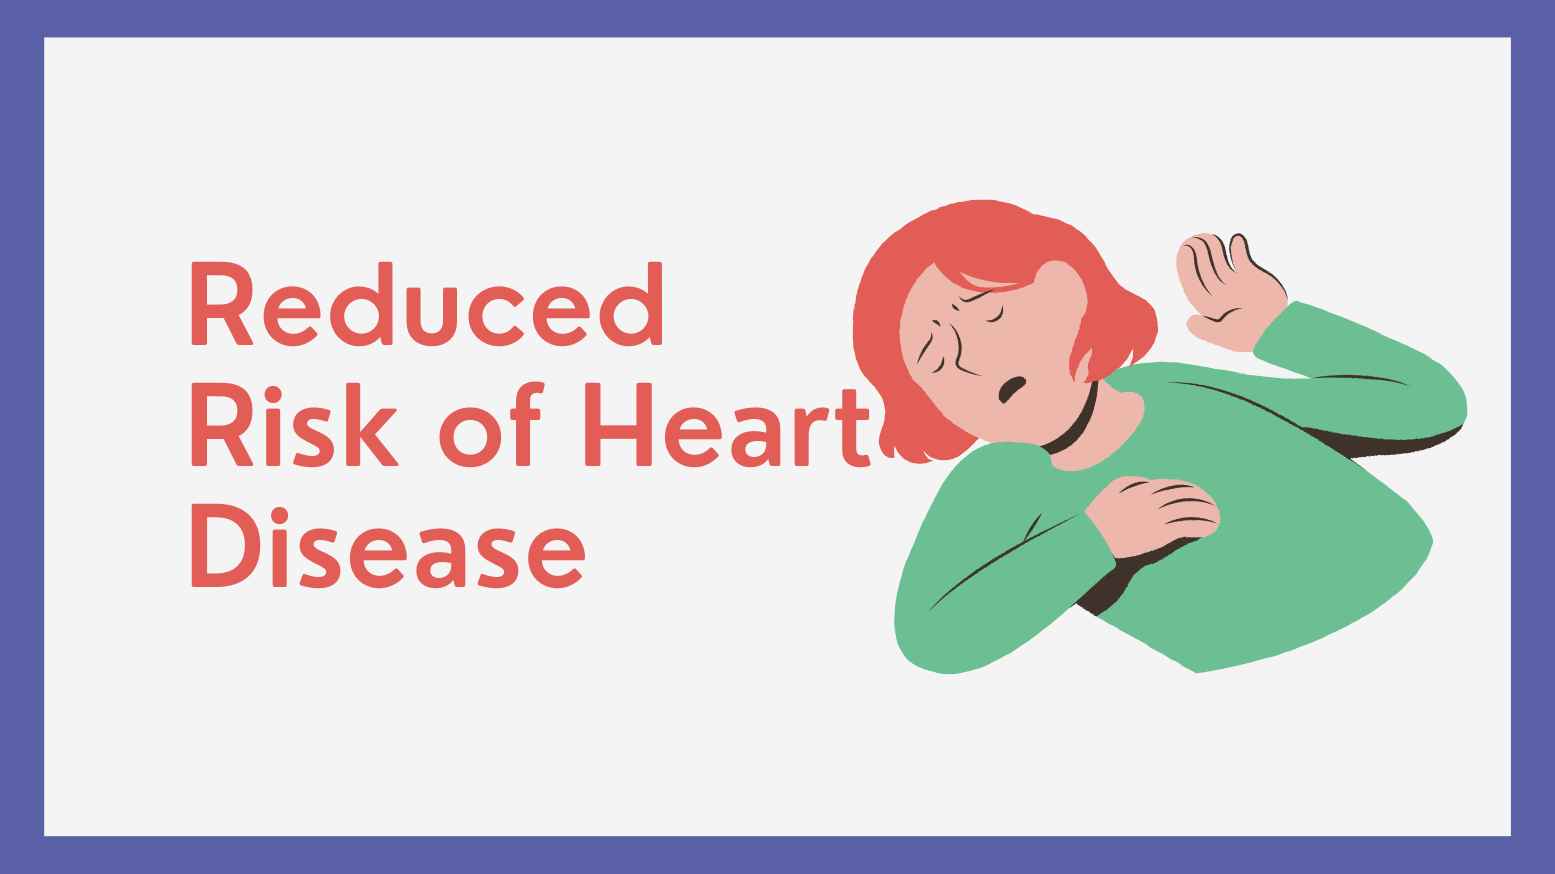 Reduced Risk of Heart Disease